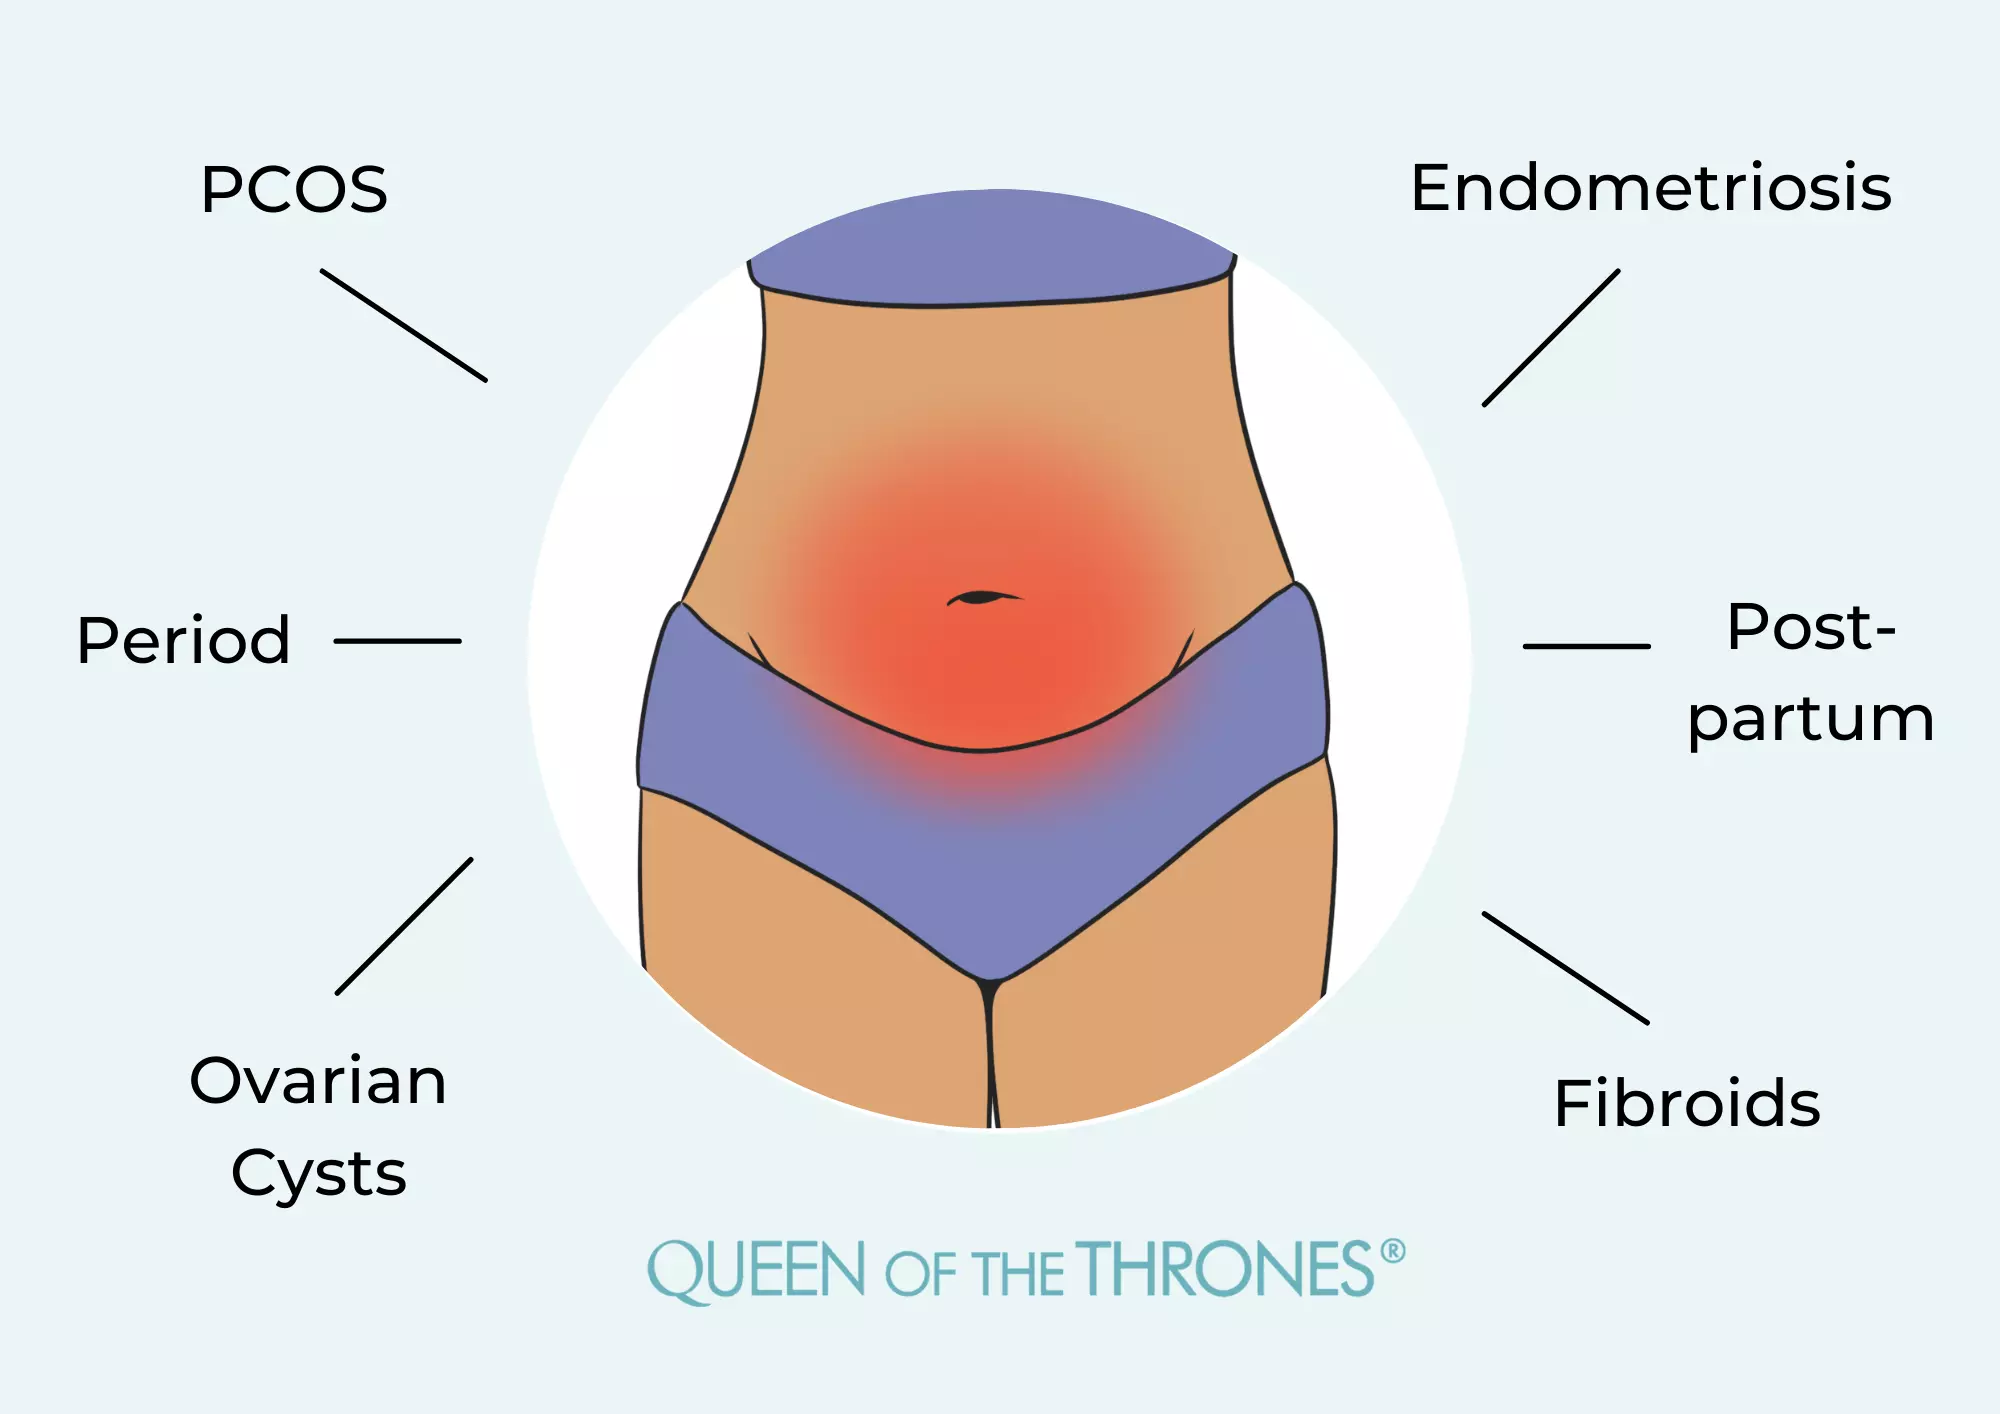 Queen of the Thrones® Castor Oil Pelvic Pack health solutions for Endometriosis and PCOS